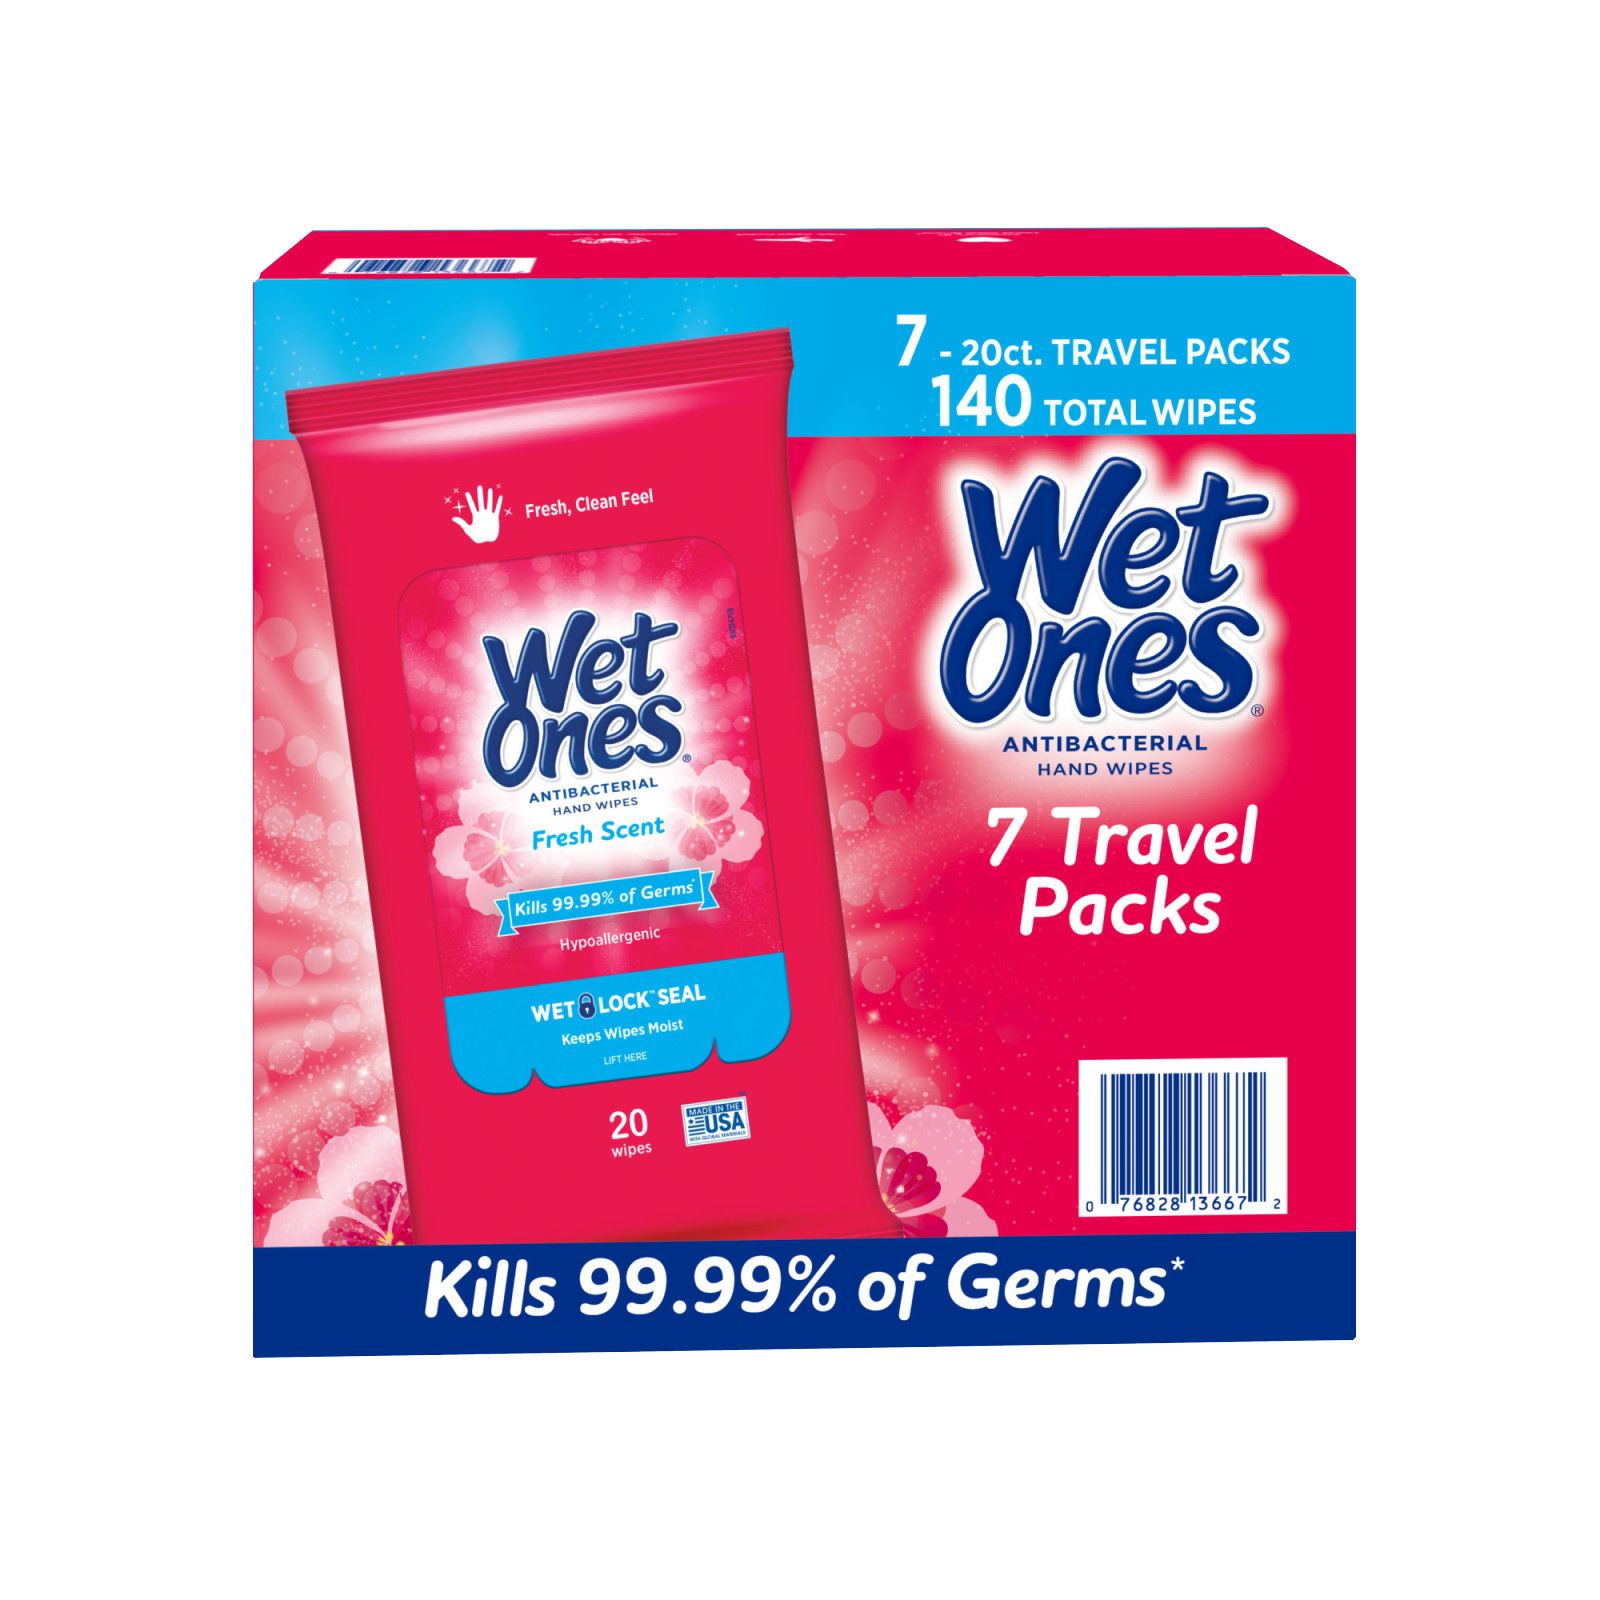 Save on Wet Ones Sensitive Skin Hand & Face Wipes Fragrance Free